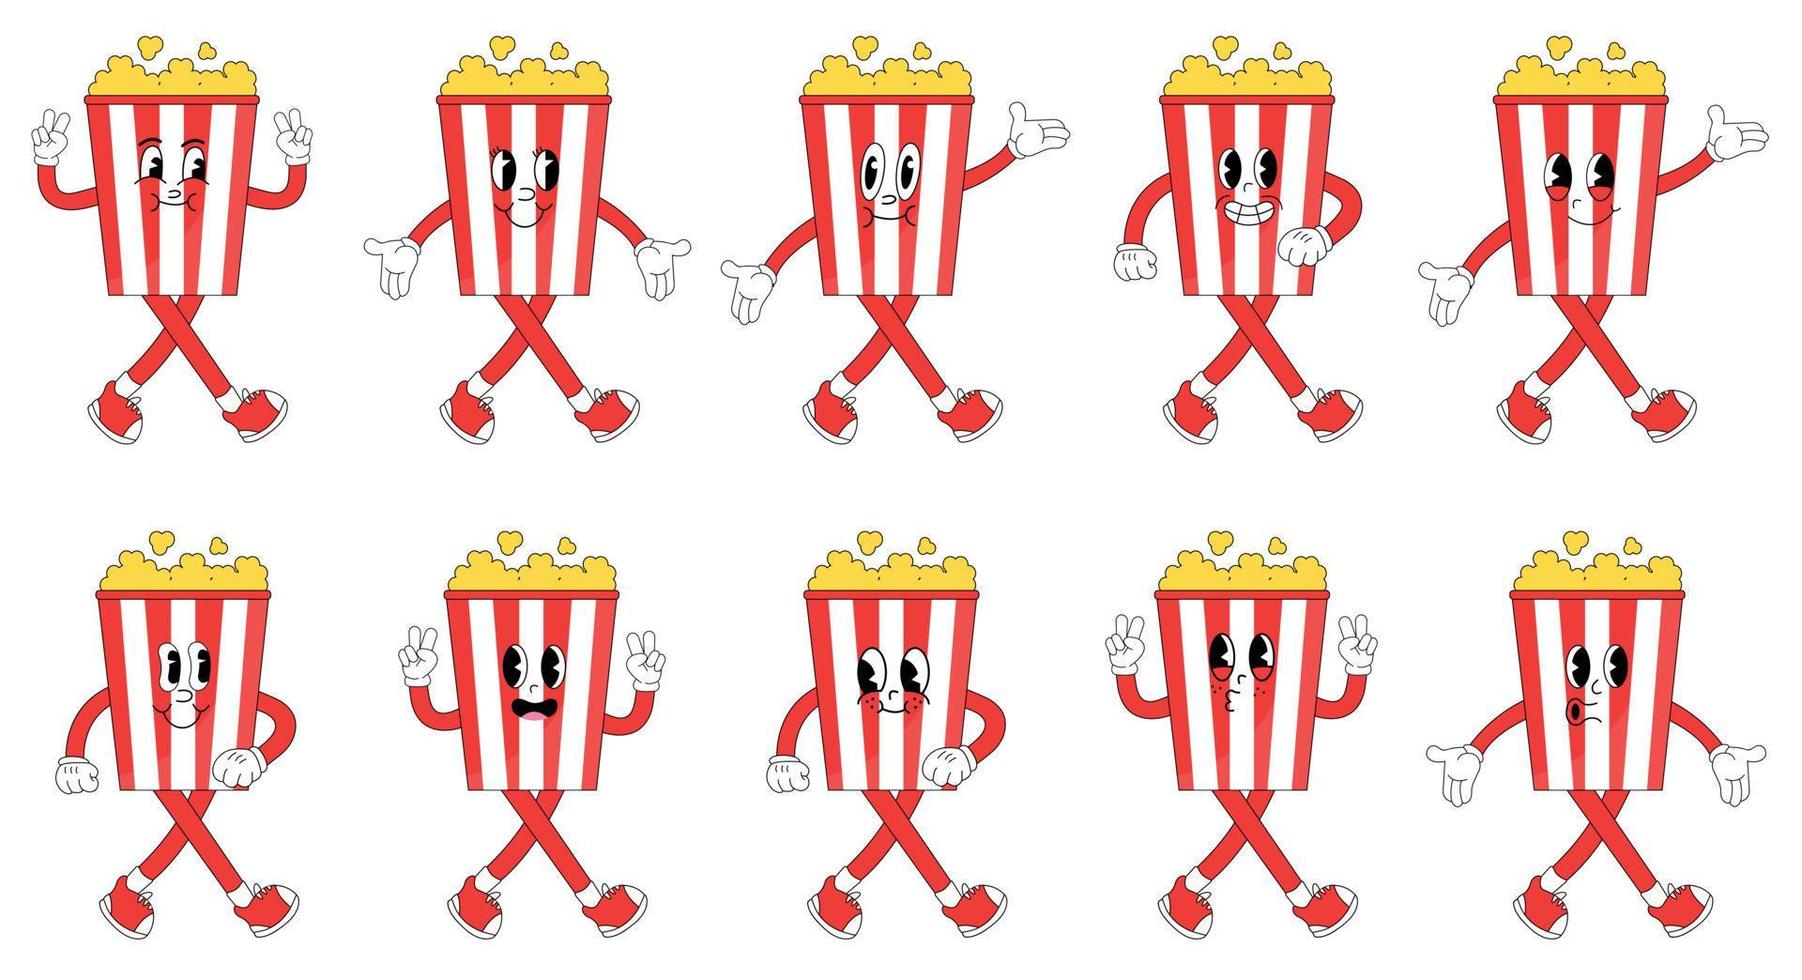 Popcorn. Cute cartoon characters with hands, legs, eyes. Bright comic style. Hand drawn Vector illustration